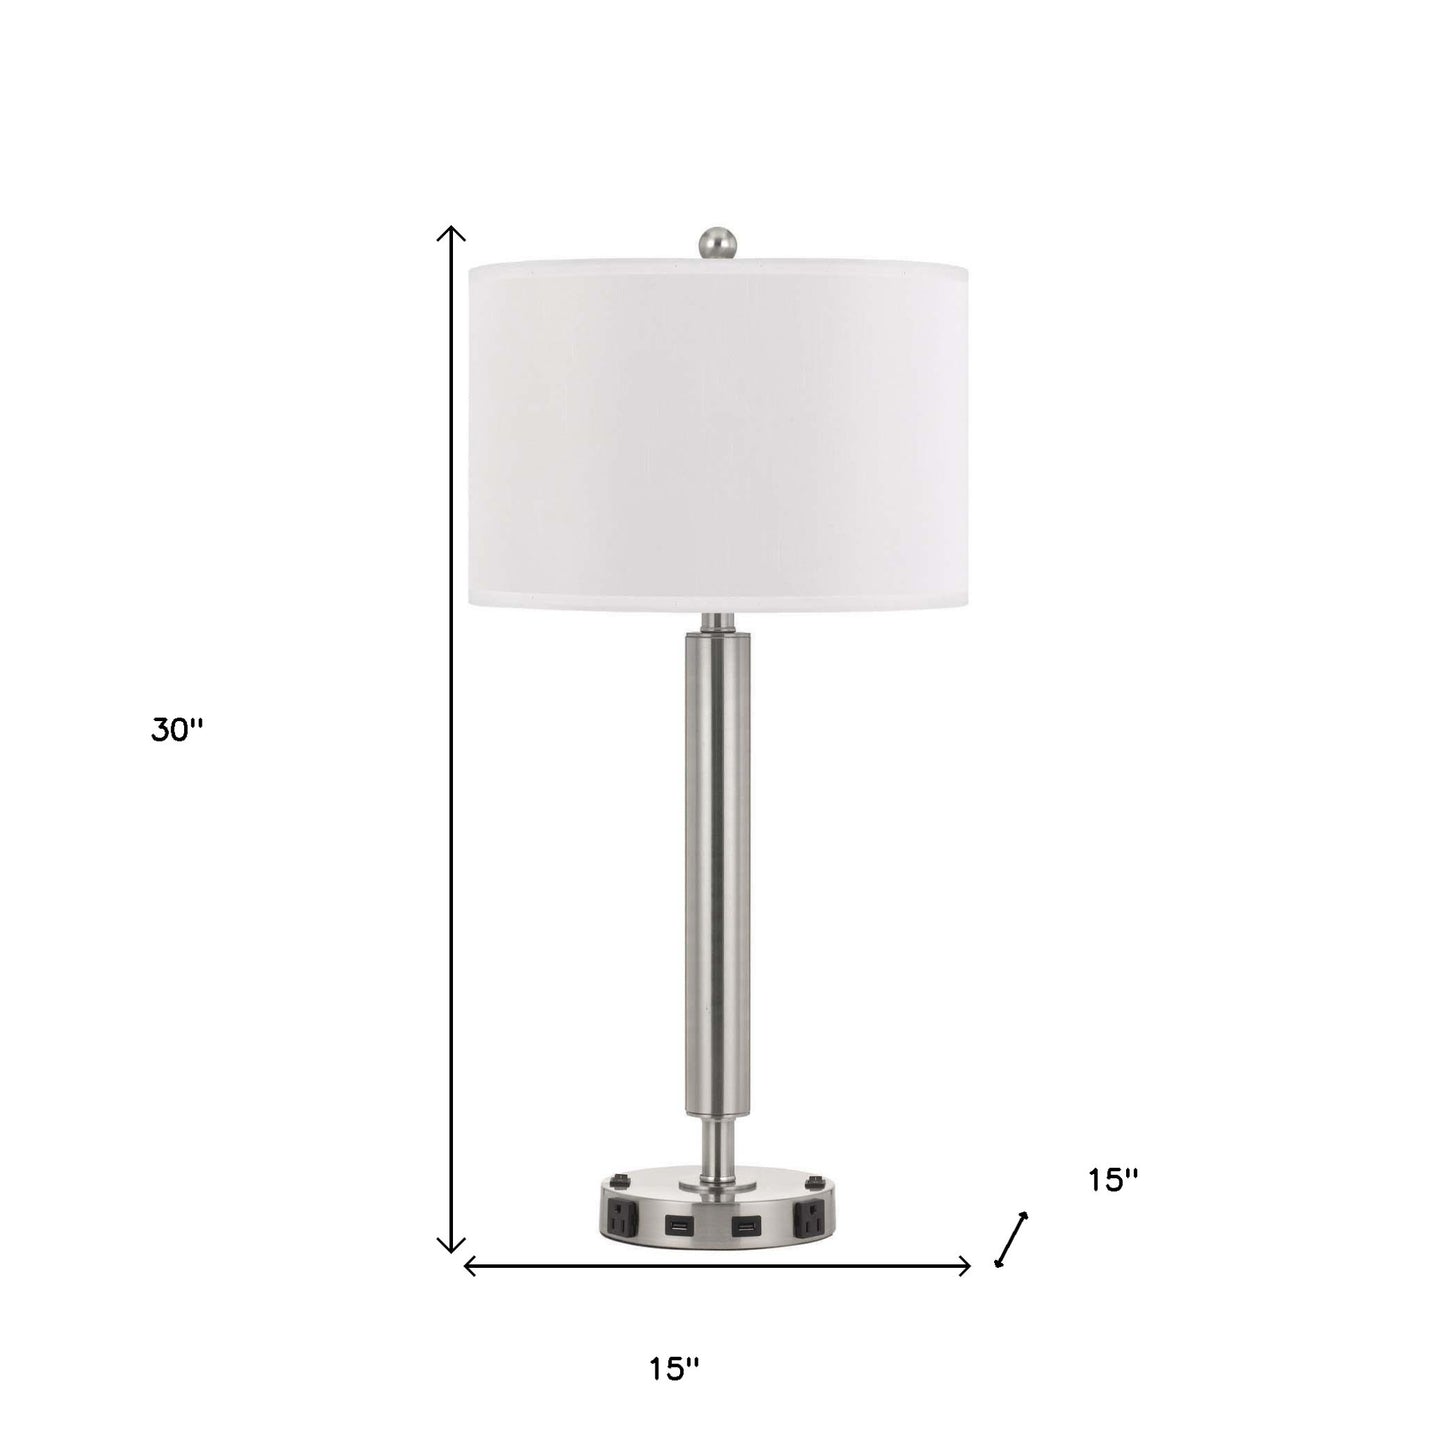 30" Nickel Metal Two Light Usb Table Lamp With White Drum Shade